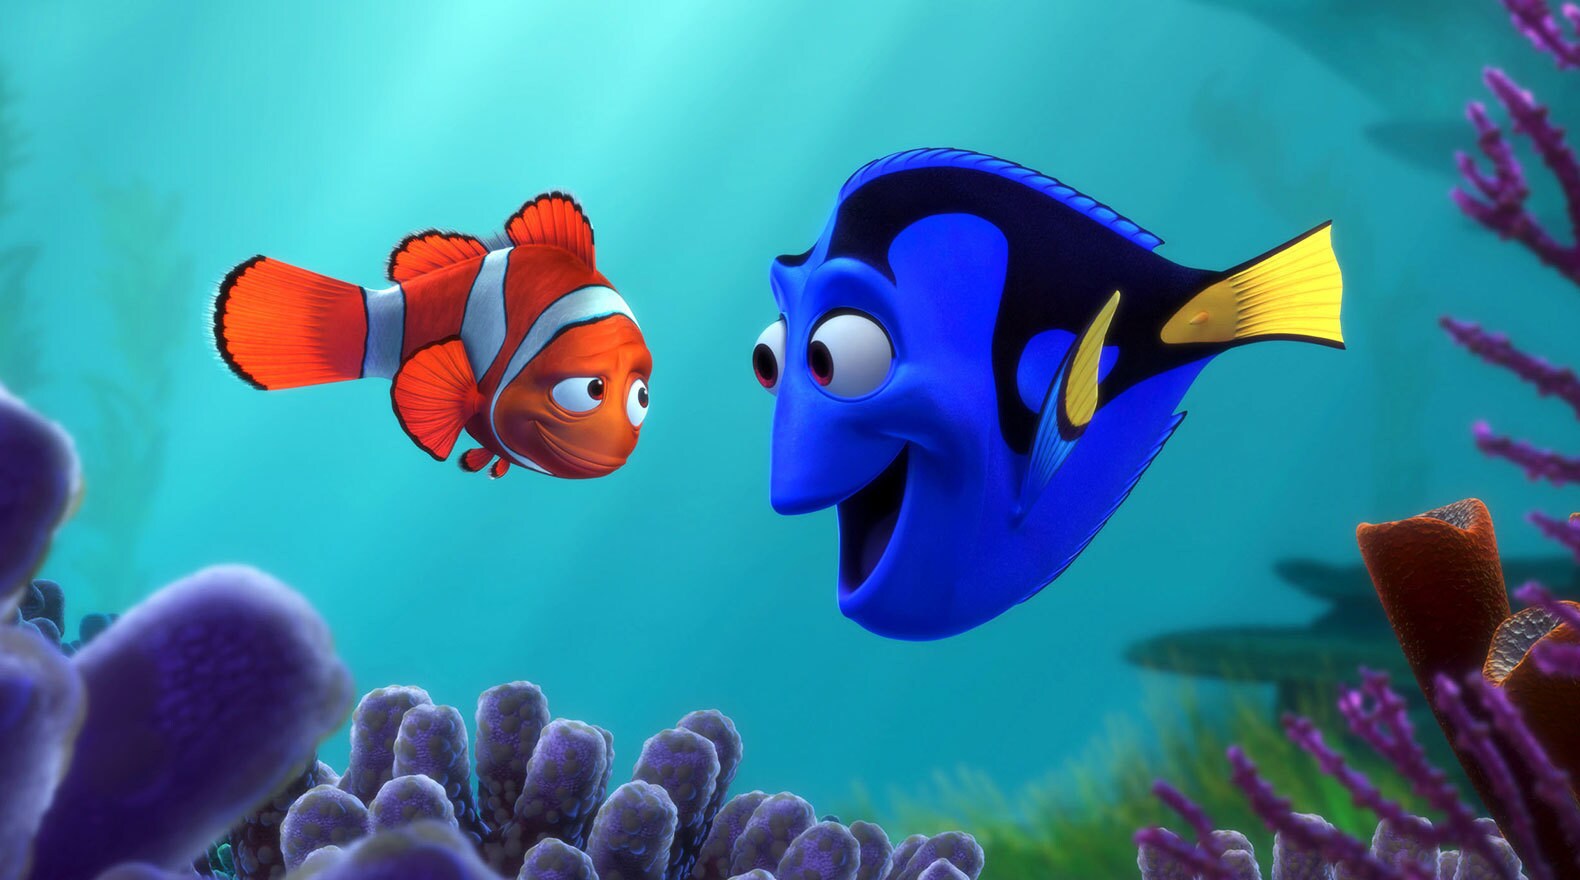 “When life gets you down, do you wanna know what you’ve gotta do? Just keep swimming!”